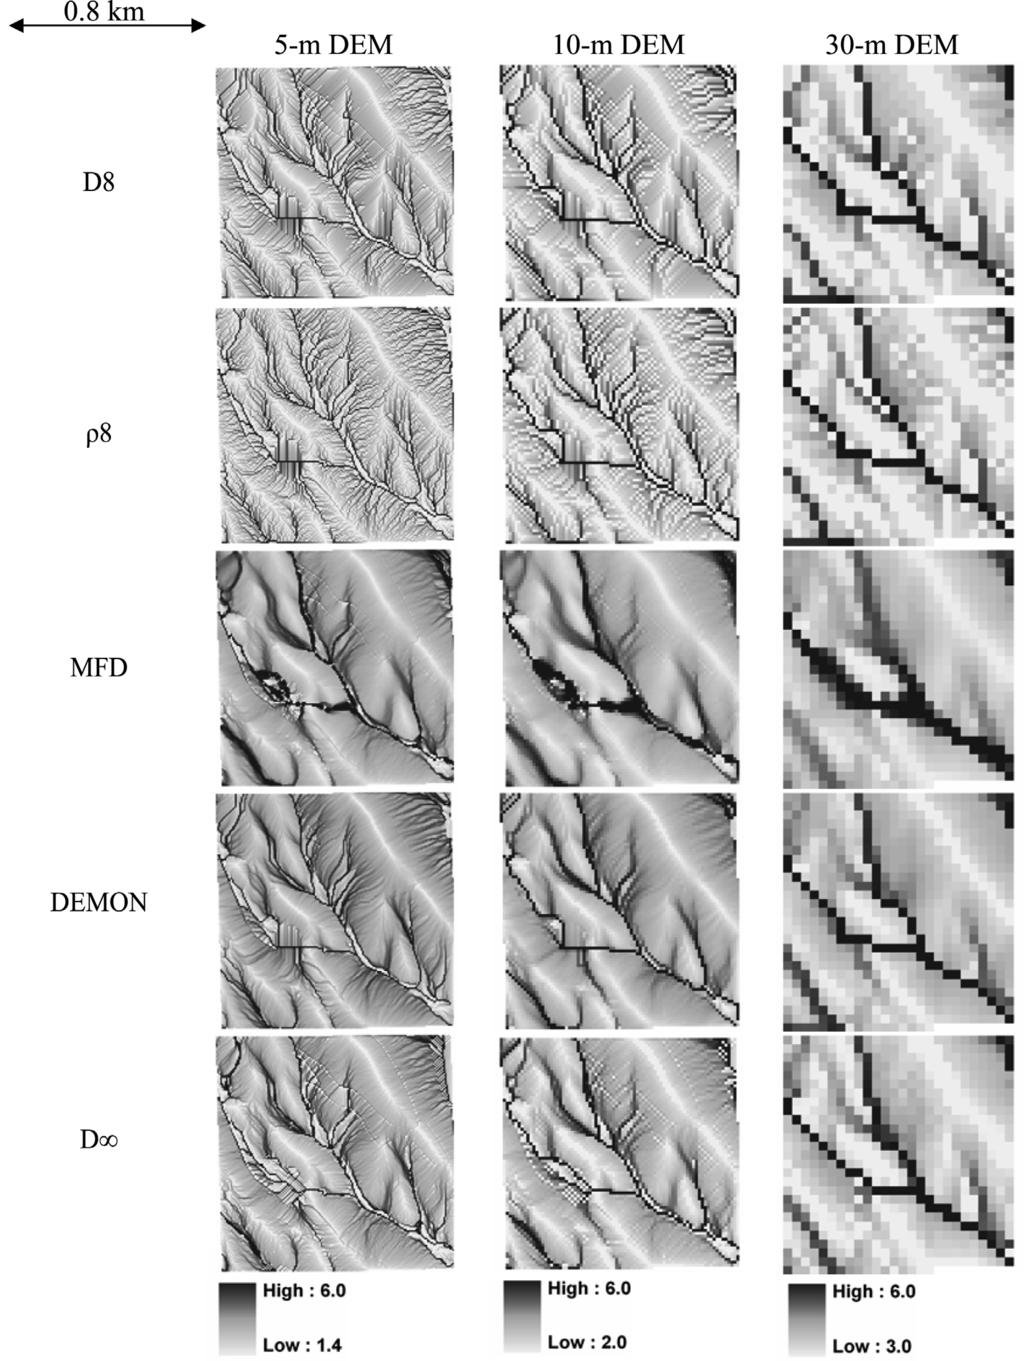 Figure 2. Maps of log(a) estimated by five different algorithms on the North field using 5-, 10-, and 30-m DEMs. [e.g., Tarboton, 1997, Figures 8 and 9]. Unrealistic drainage patterns (i.e., straight flow paths) resulting from the grid structure are present in all algorithms to some degree, but such grid artifacts are most pronounced in single-direction algorithms.